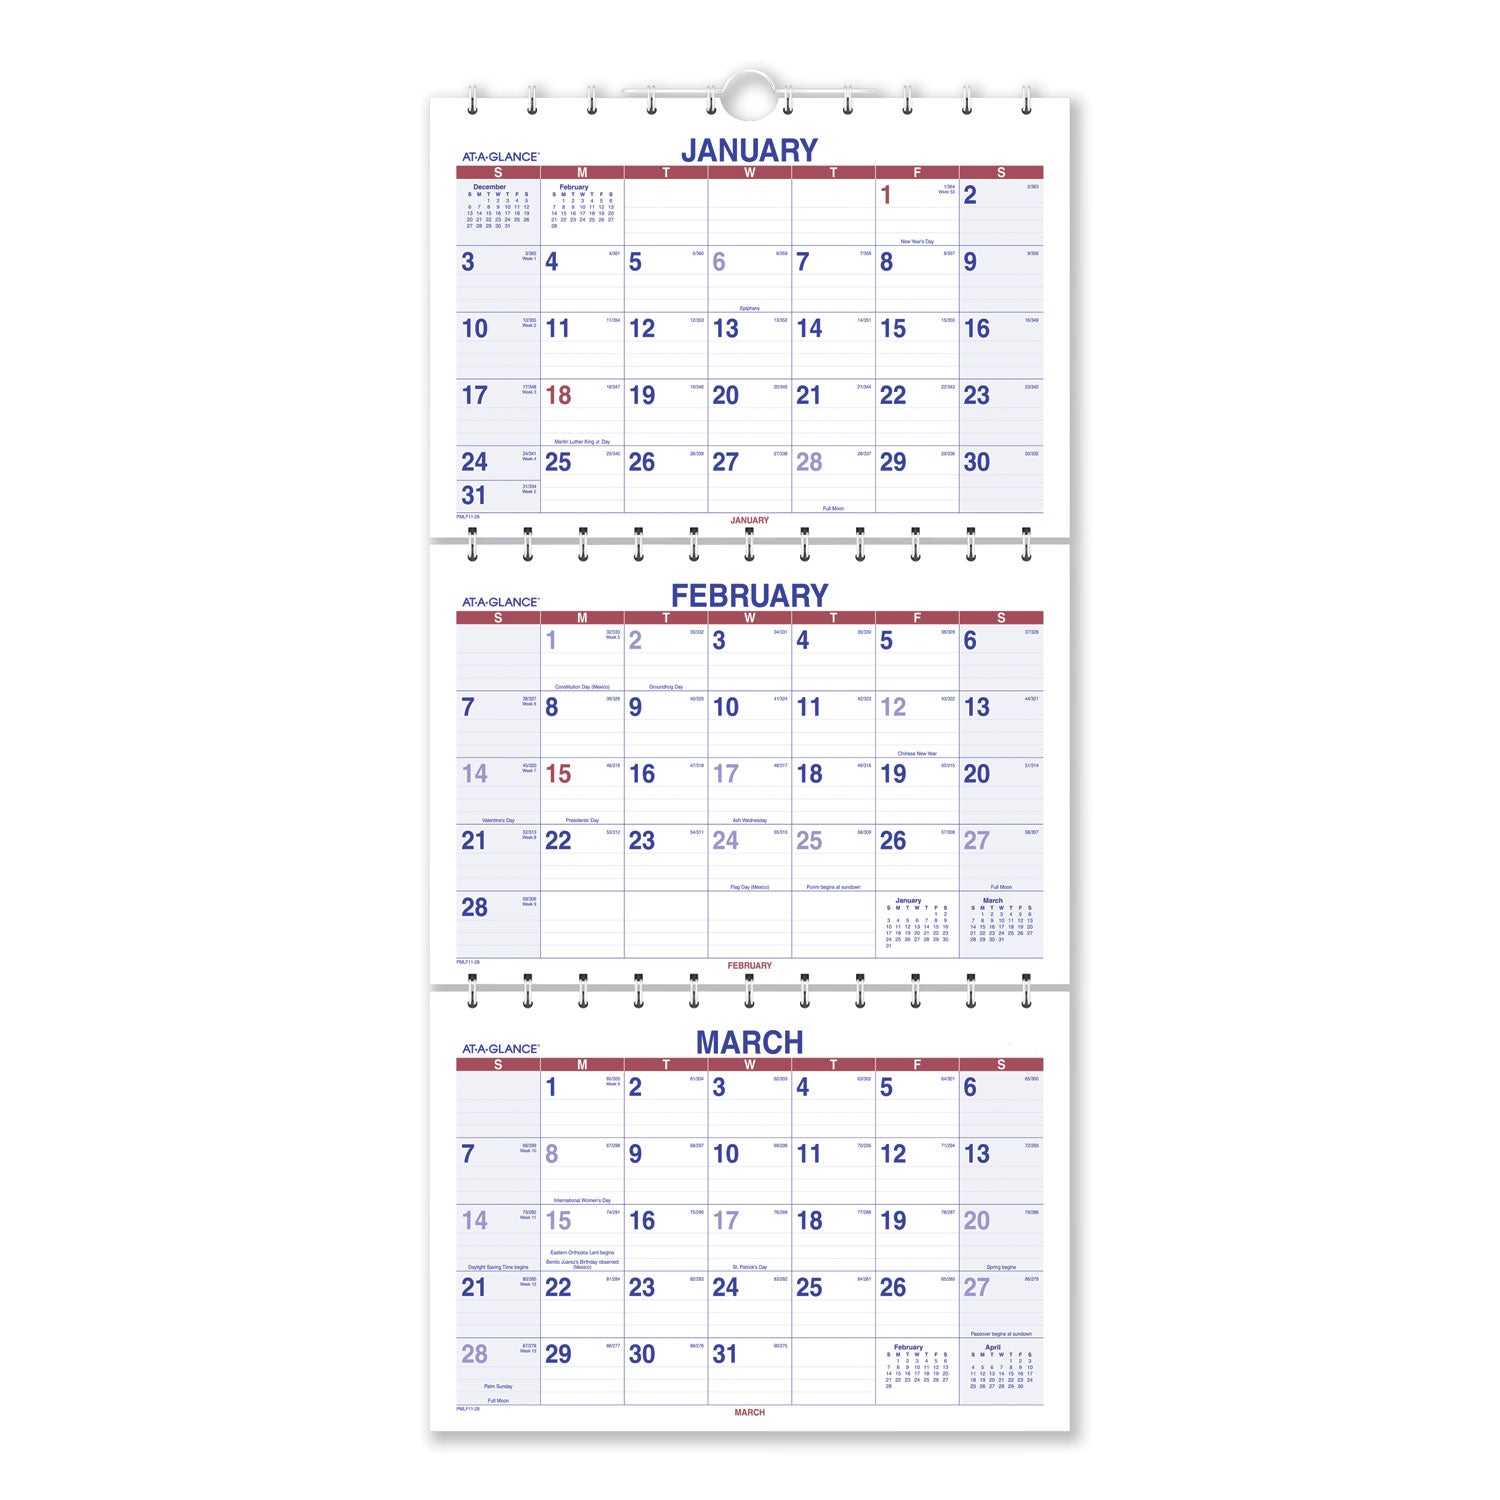 move-a-page-three-month-wall-calendar-12-x-27-white-red-blue-sheets-15-month-dec-to-feb-2023-to-2025_aagpmlf1128 - 1